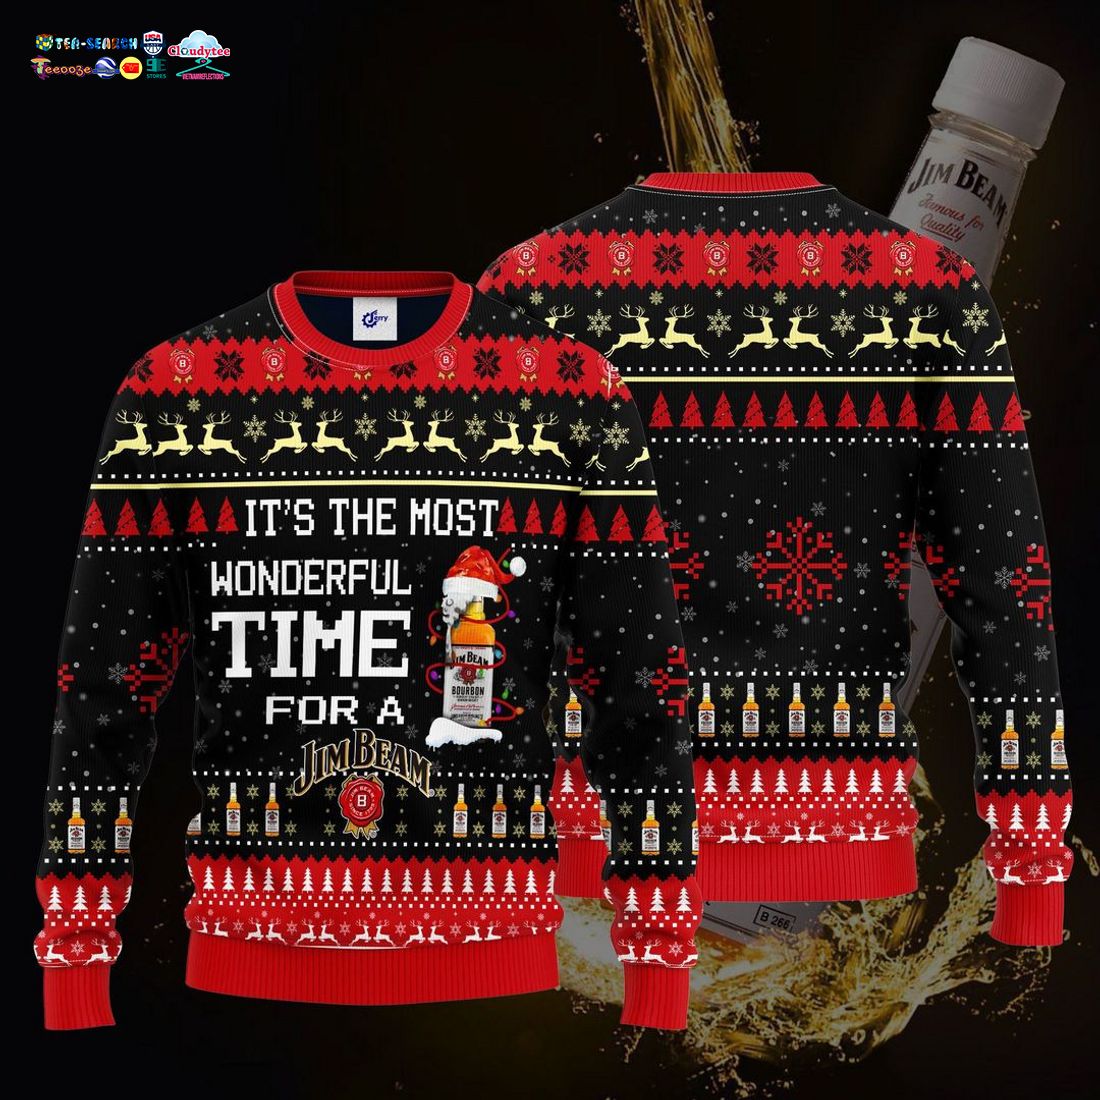 its-the-most-wonderful-time-for-a-jim-beam-ugly-christmas-sweater-1-J1XM6.jpg